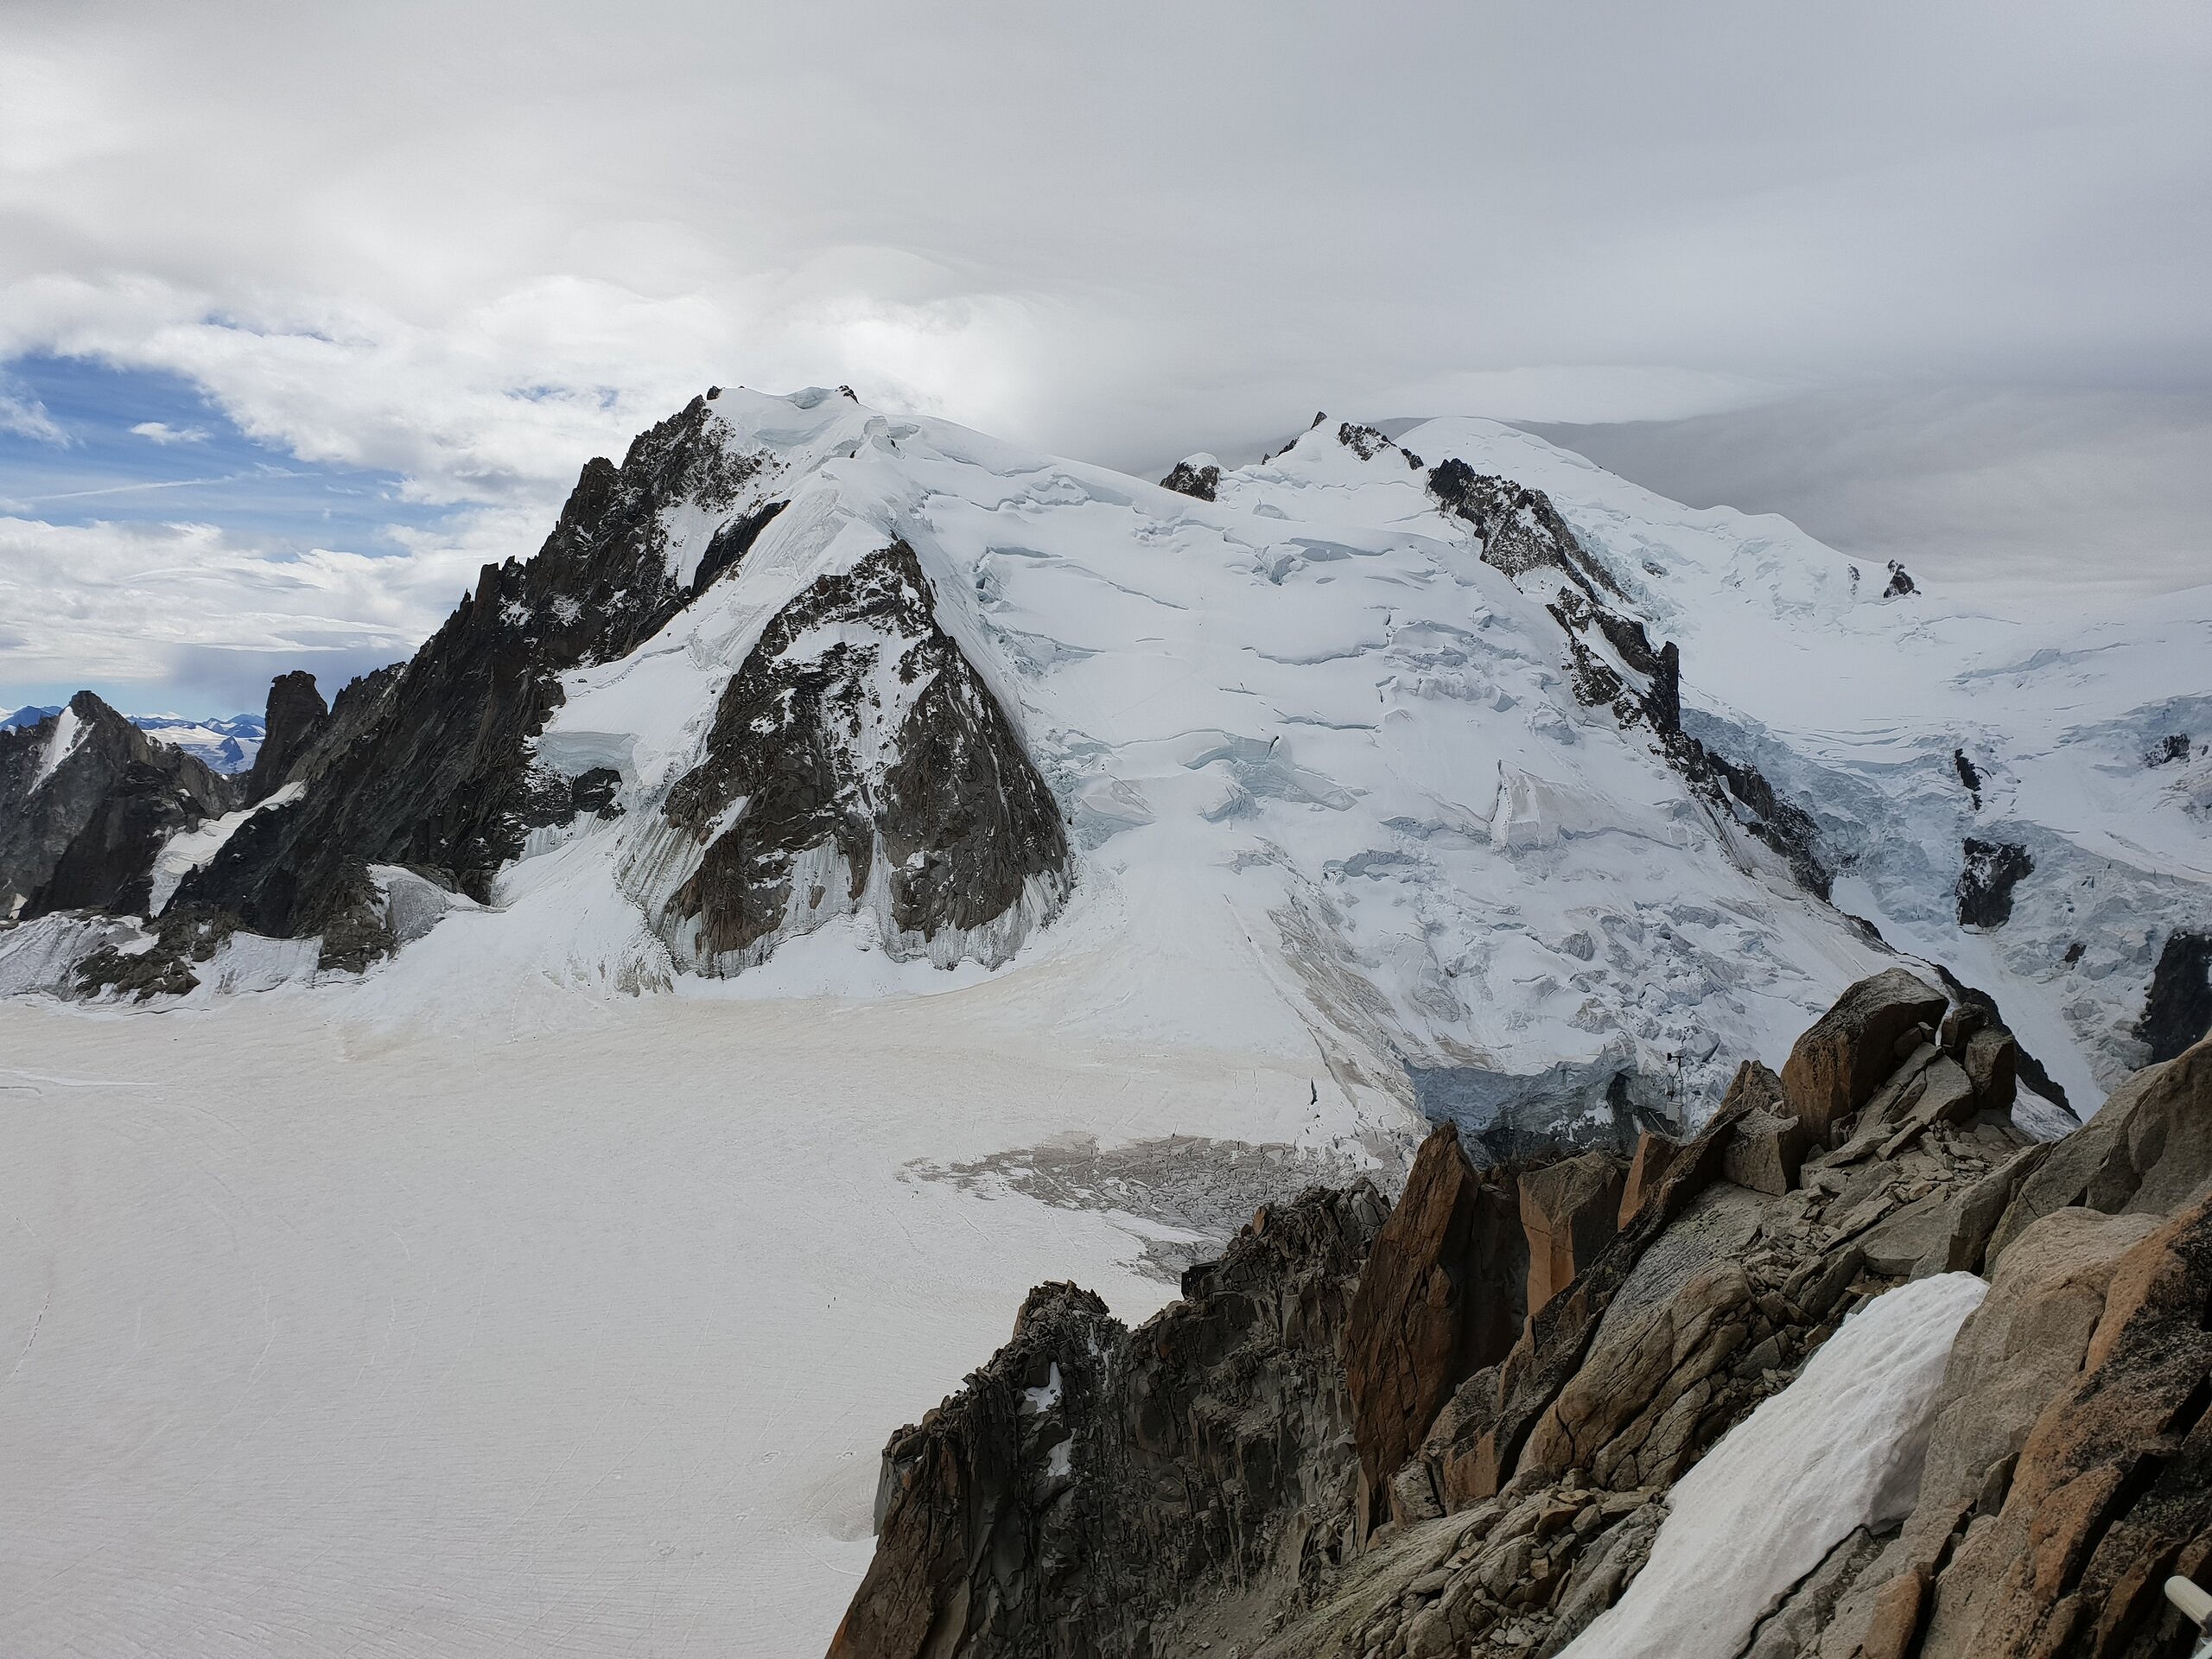 Storm clouds gather over Mont Blanc - or should that be Monte Bianco?  © Natalie Berry